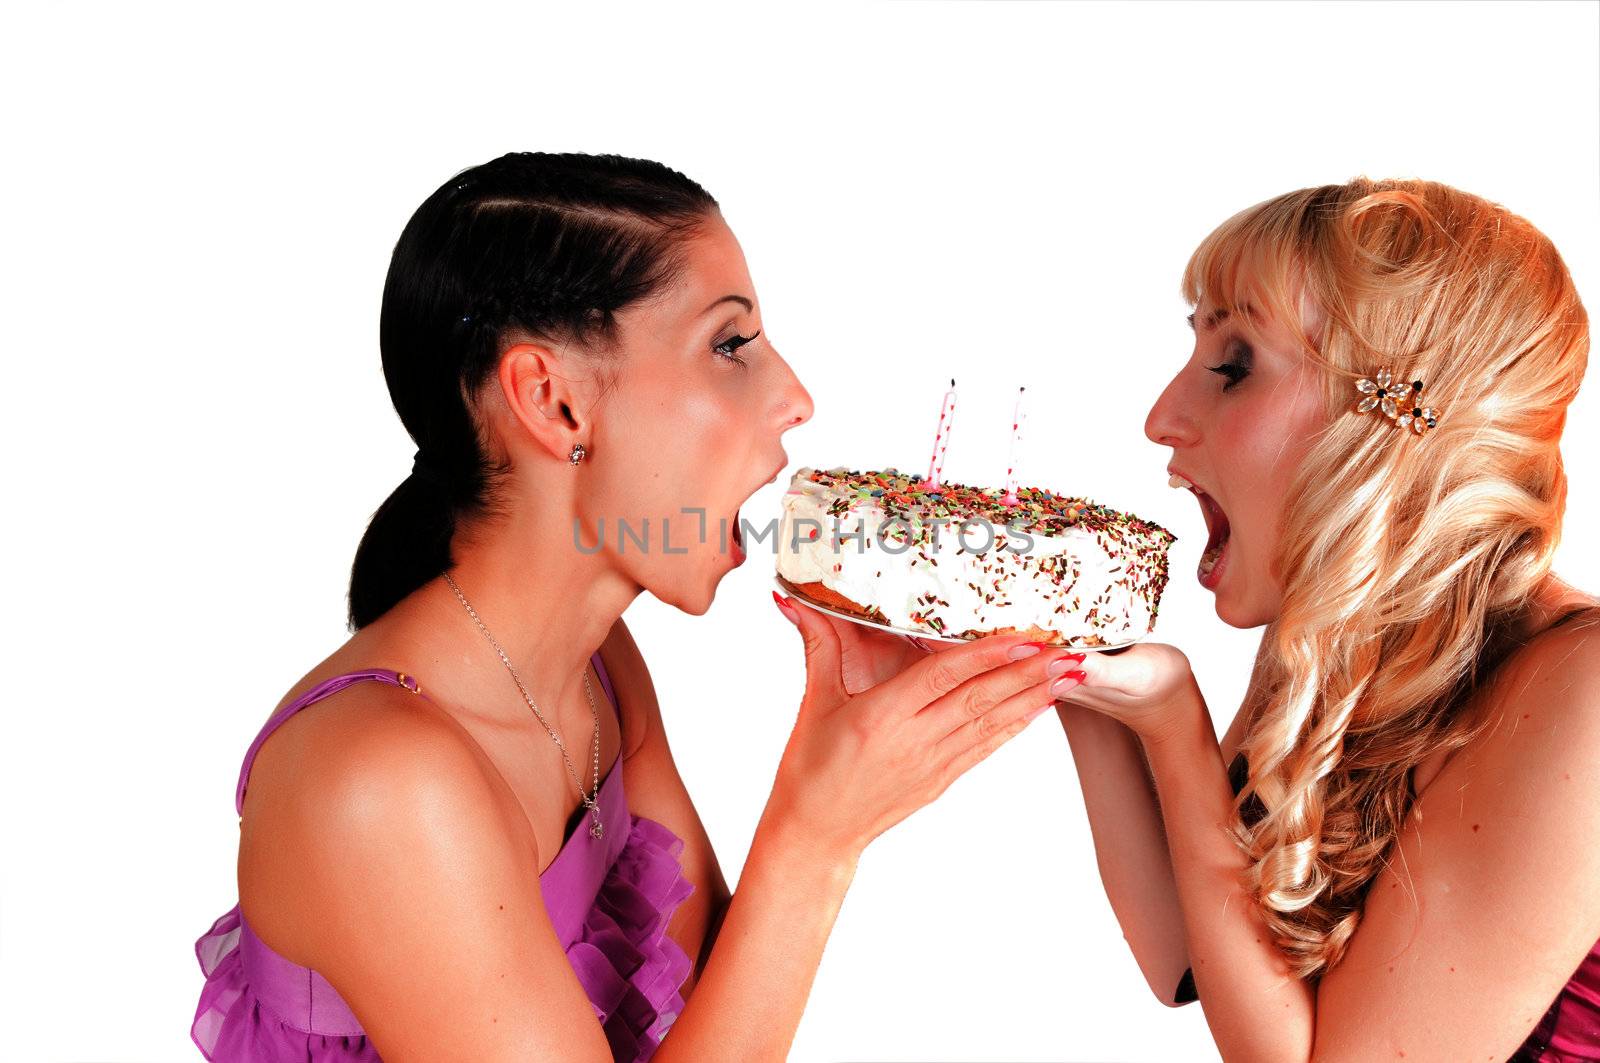 Two girls eating the cake by anytka